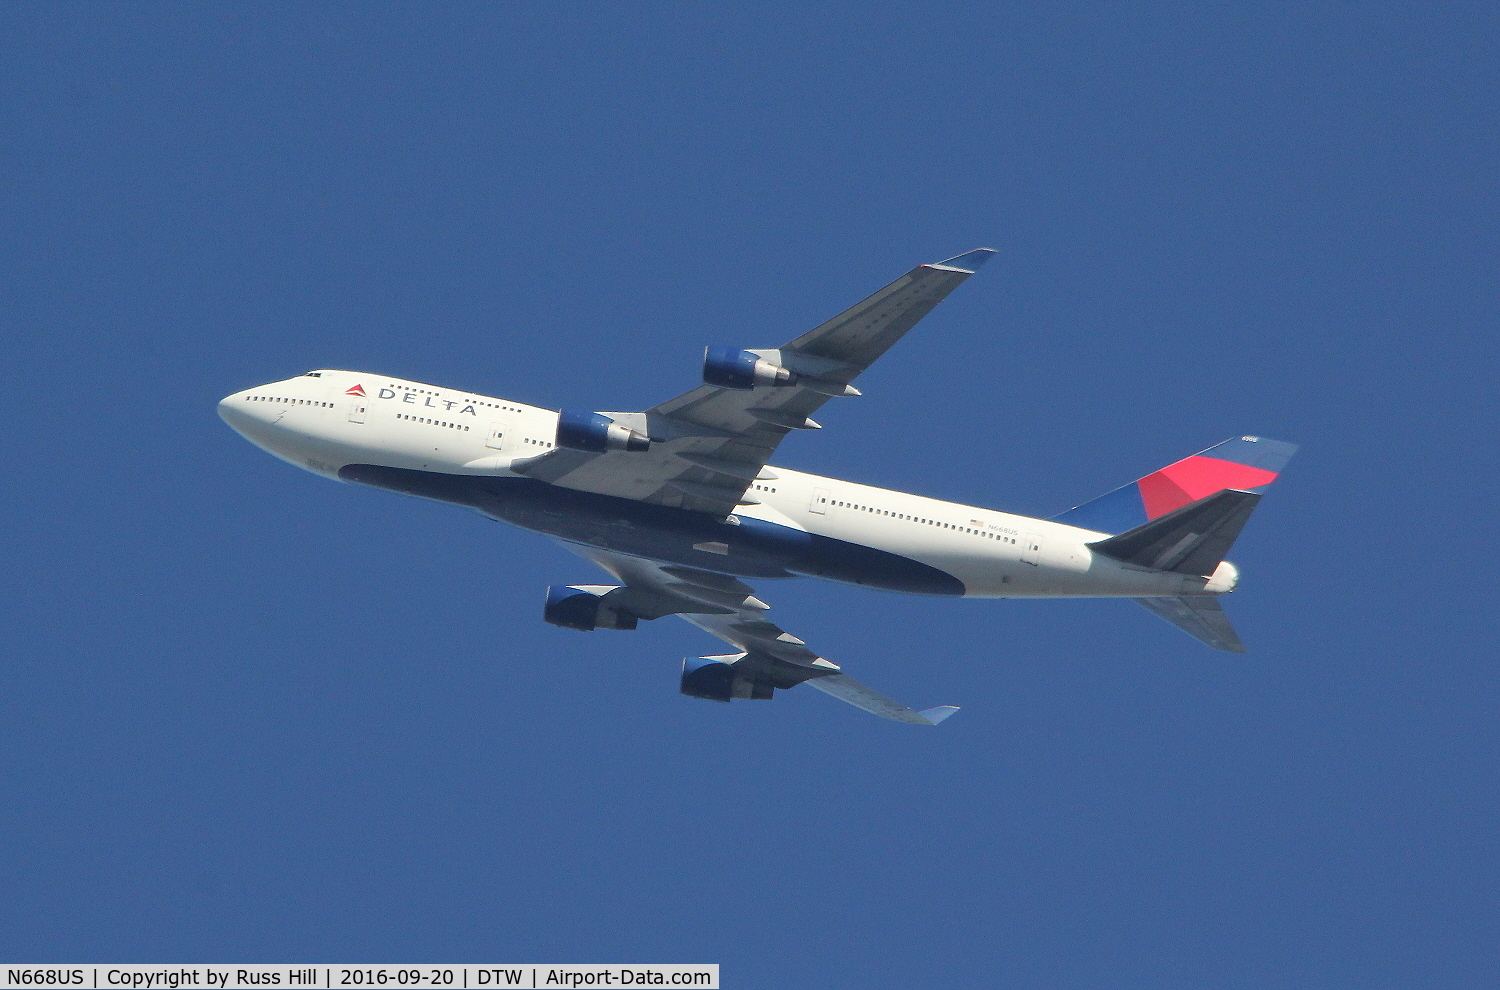 N668US, 1990 Boeing 747-451 C/N 24223, DTW>PVG
Ascending after departing DTW, about 15 miles out.